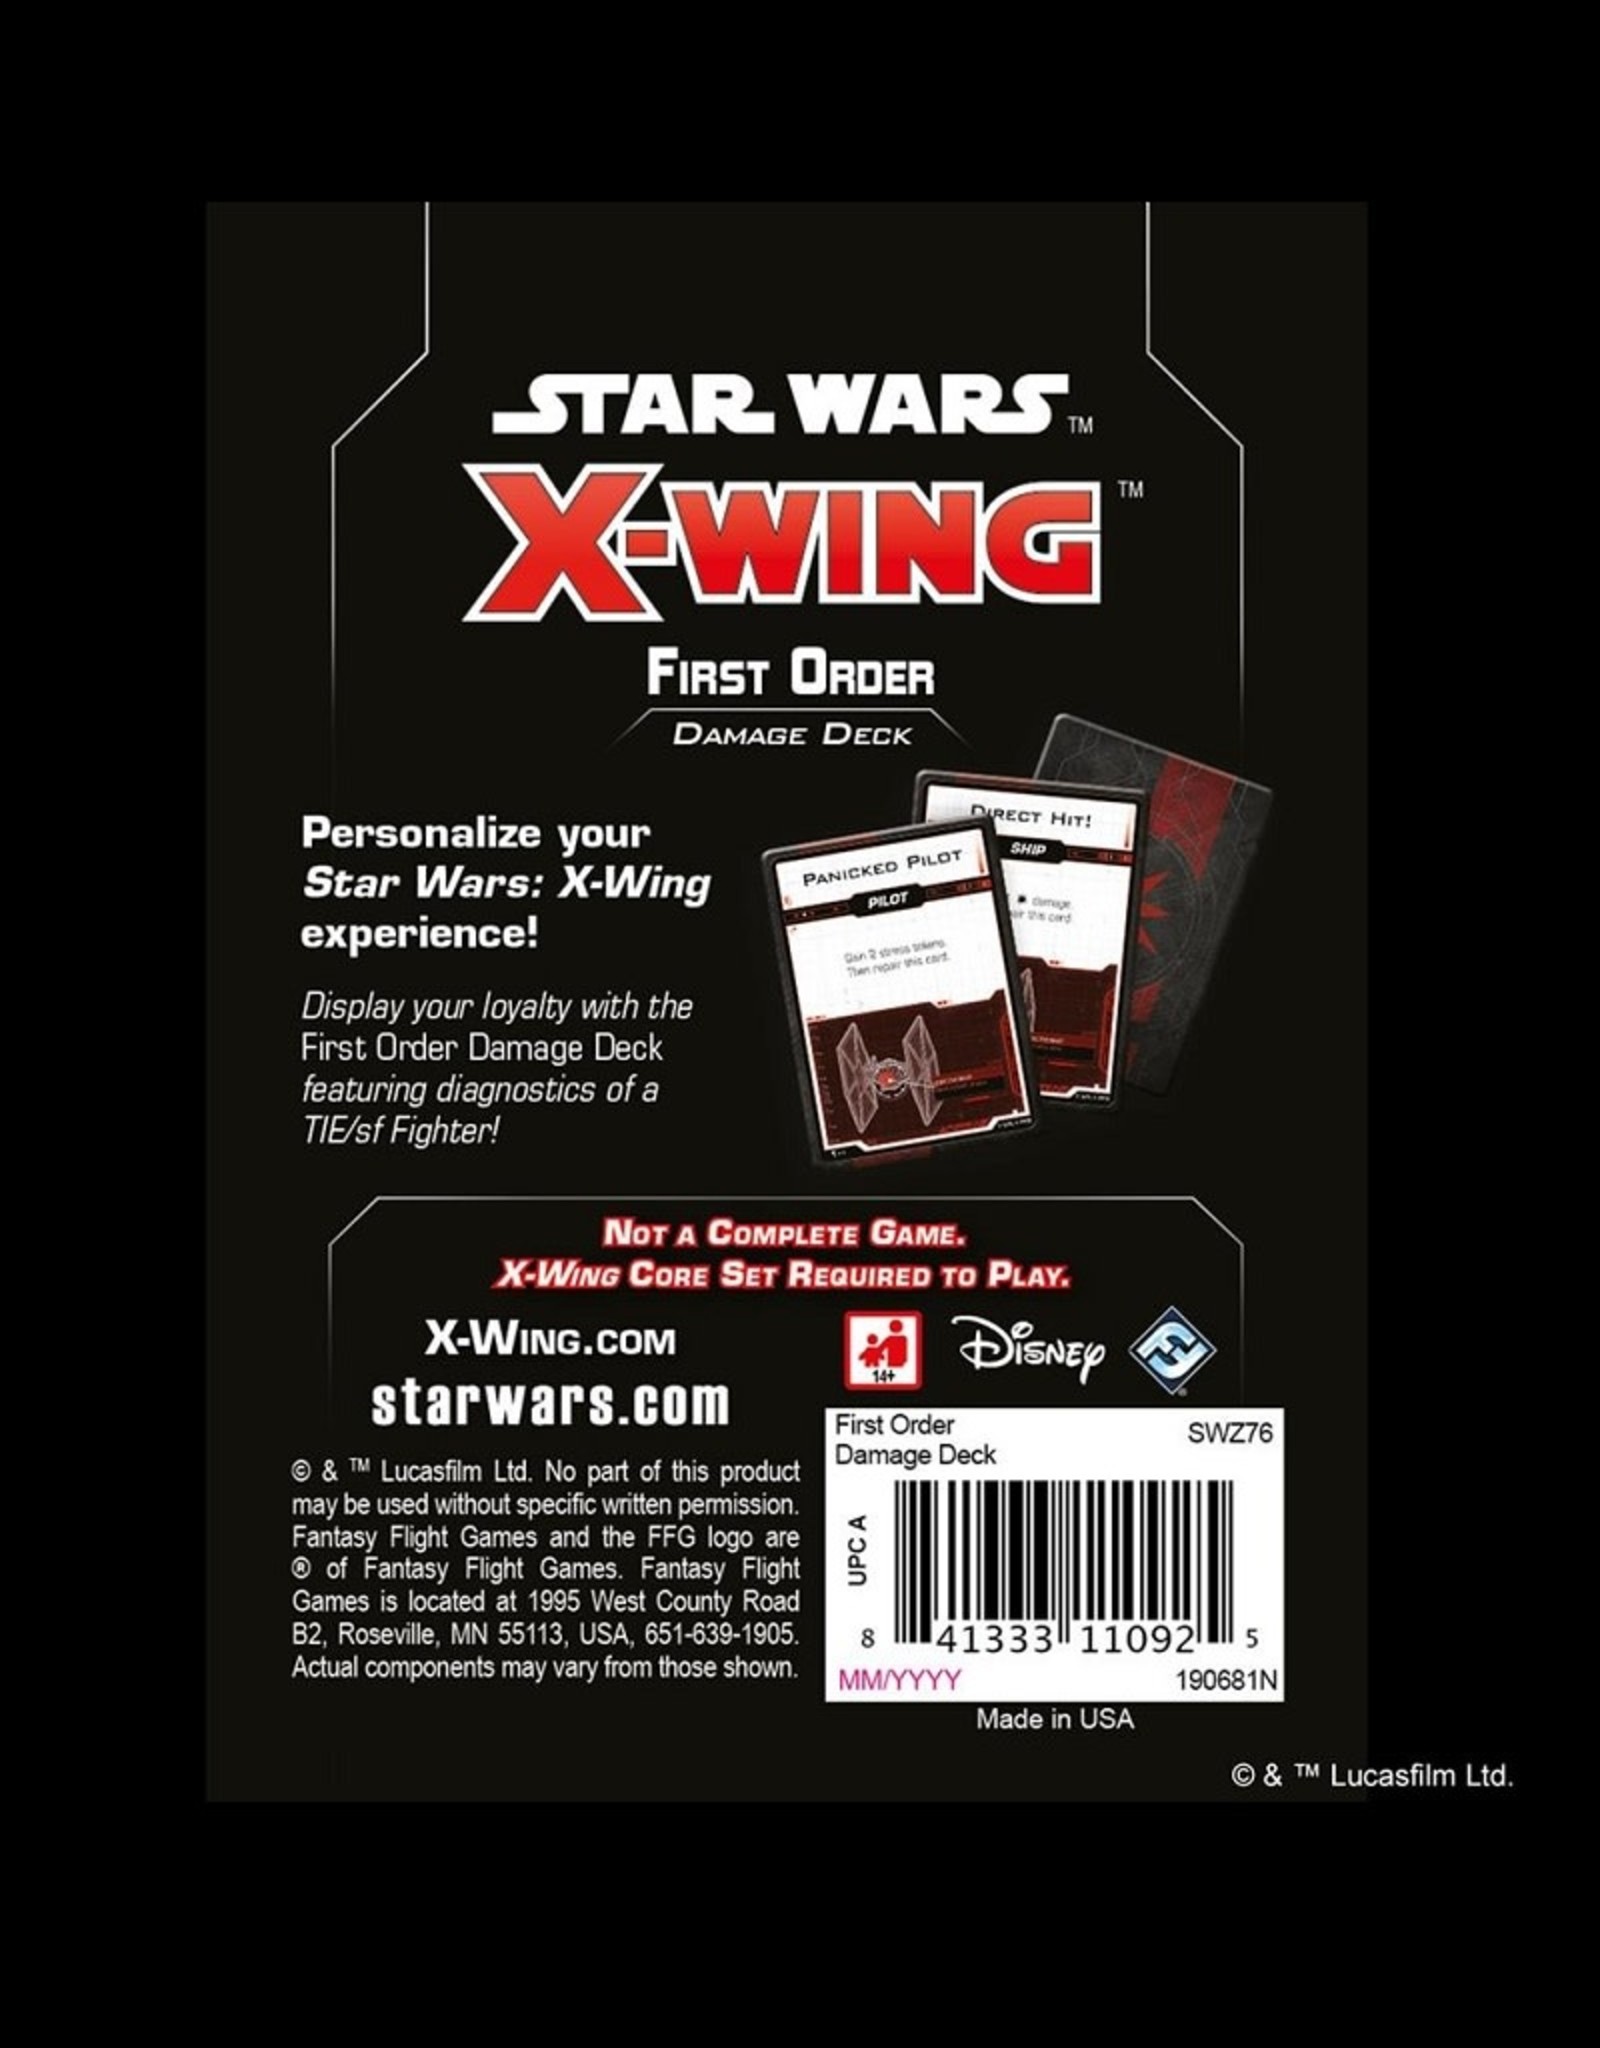 Atomic Mass Games Star Wars X-Wing: First Order Damage Deck - 2nd Edition